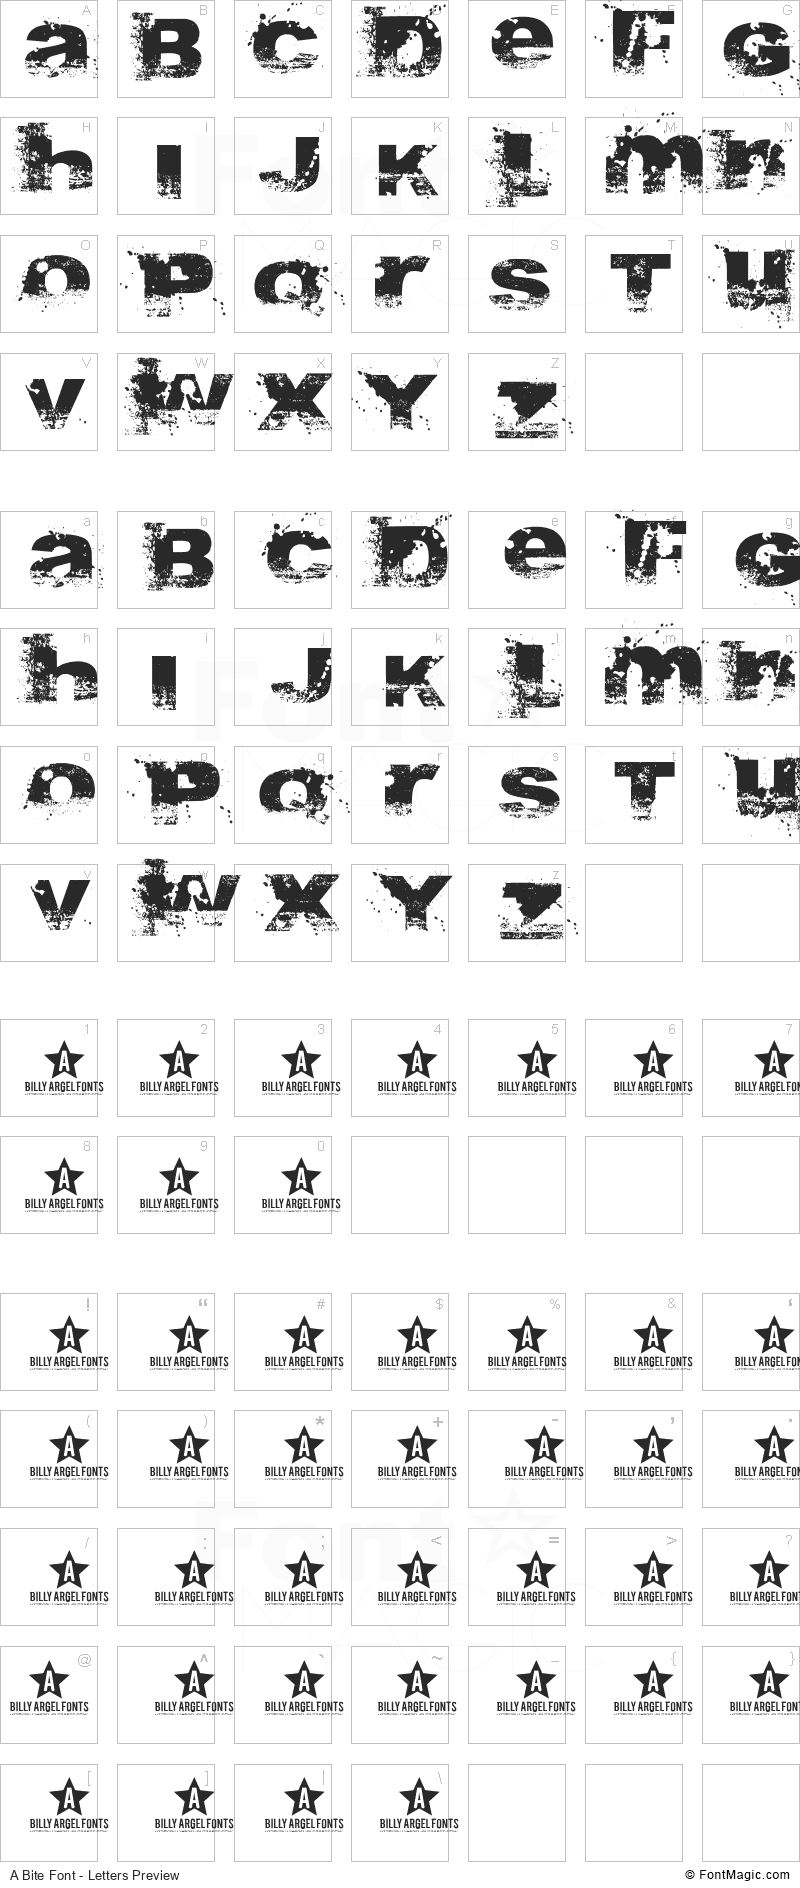 A Bite Font - All Latters Preview Chart